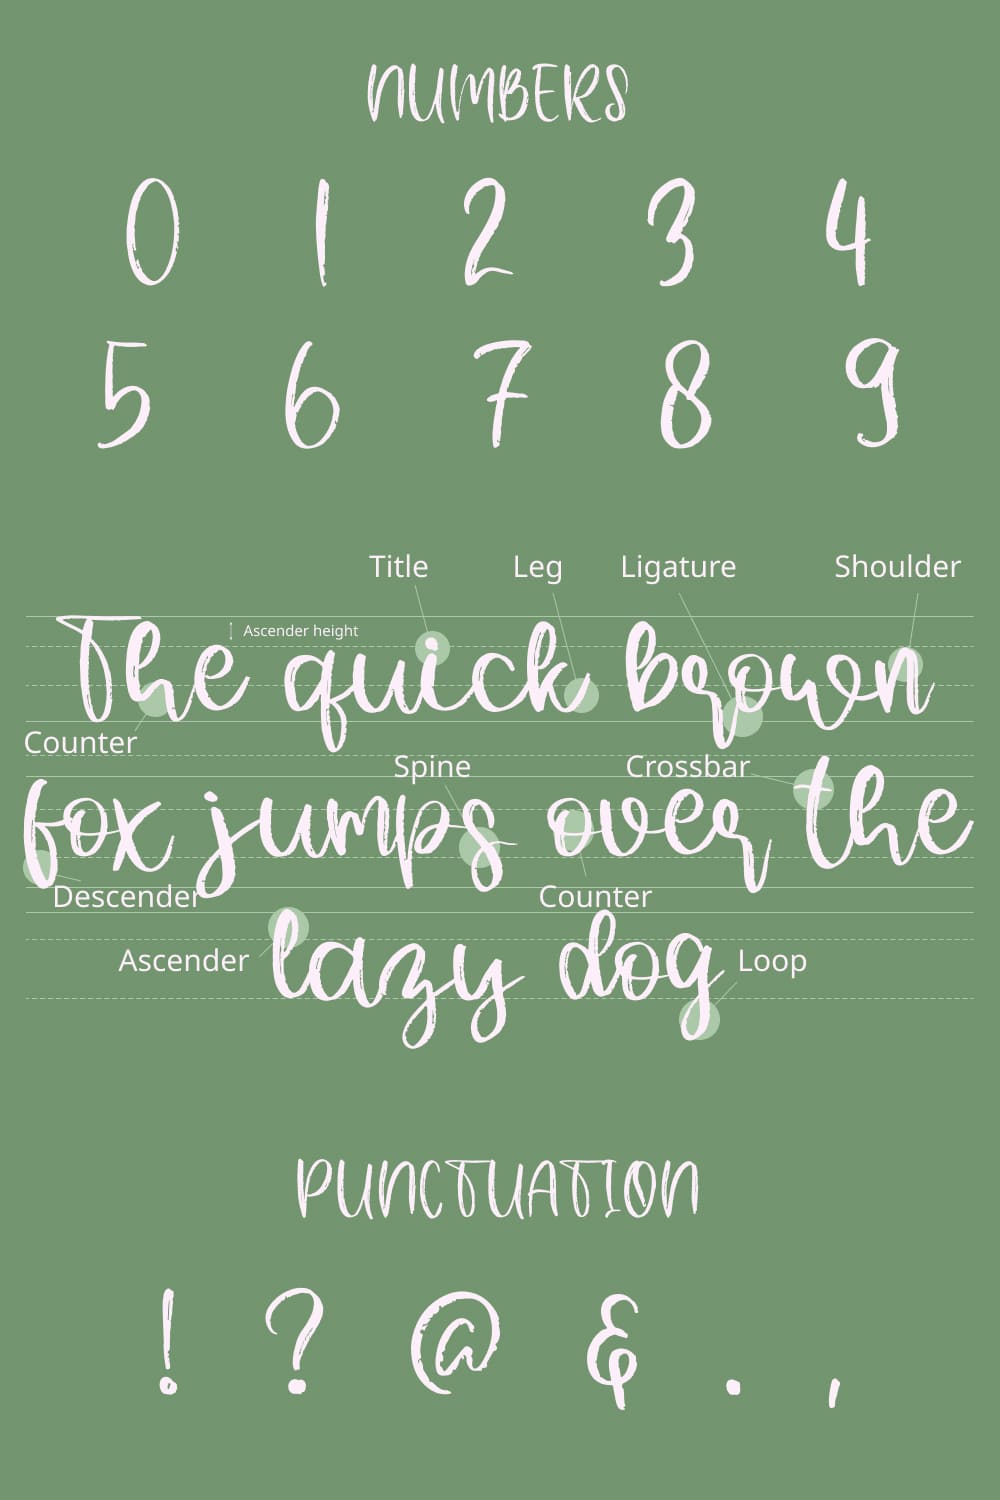 Numbers and other characters of farmhouse font.